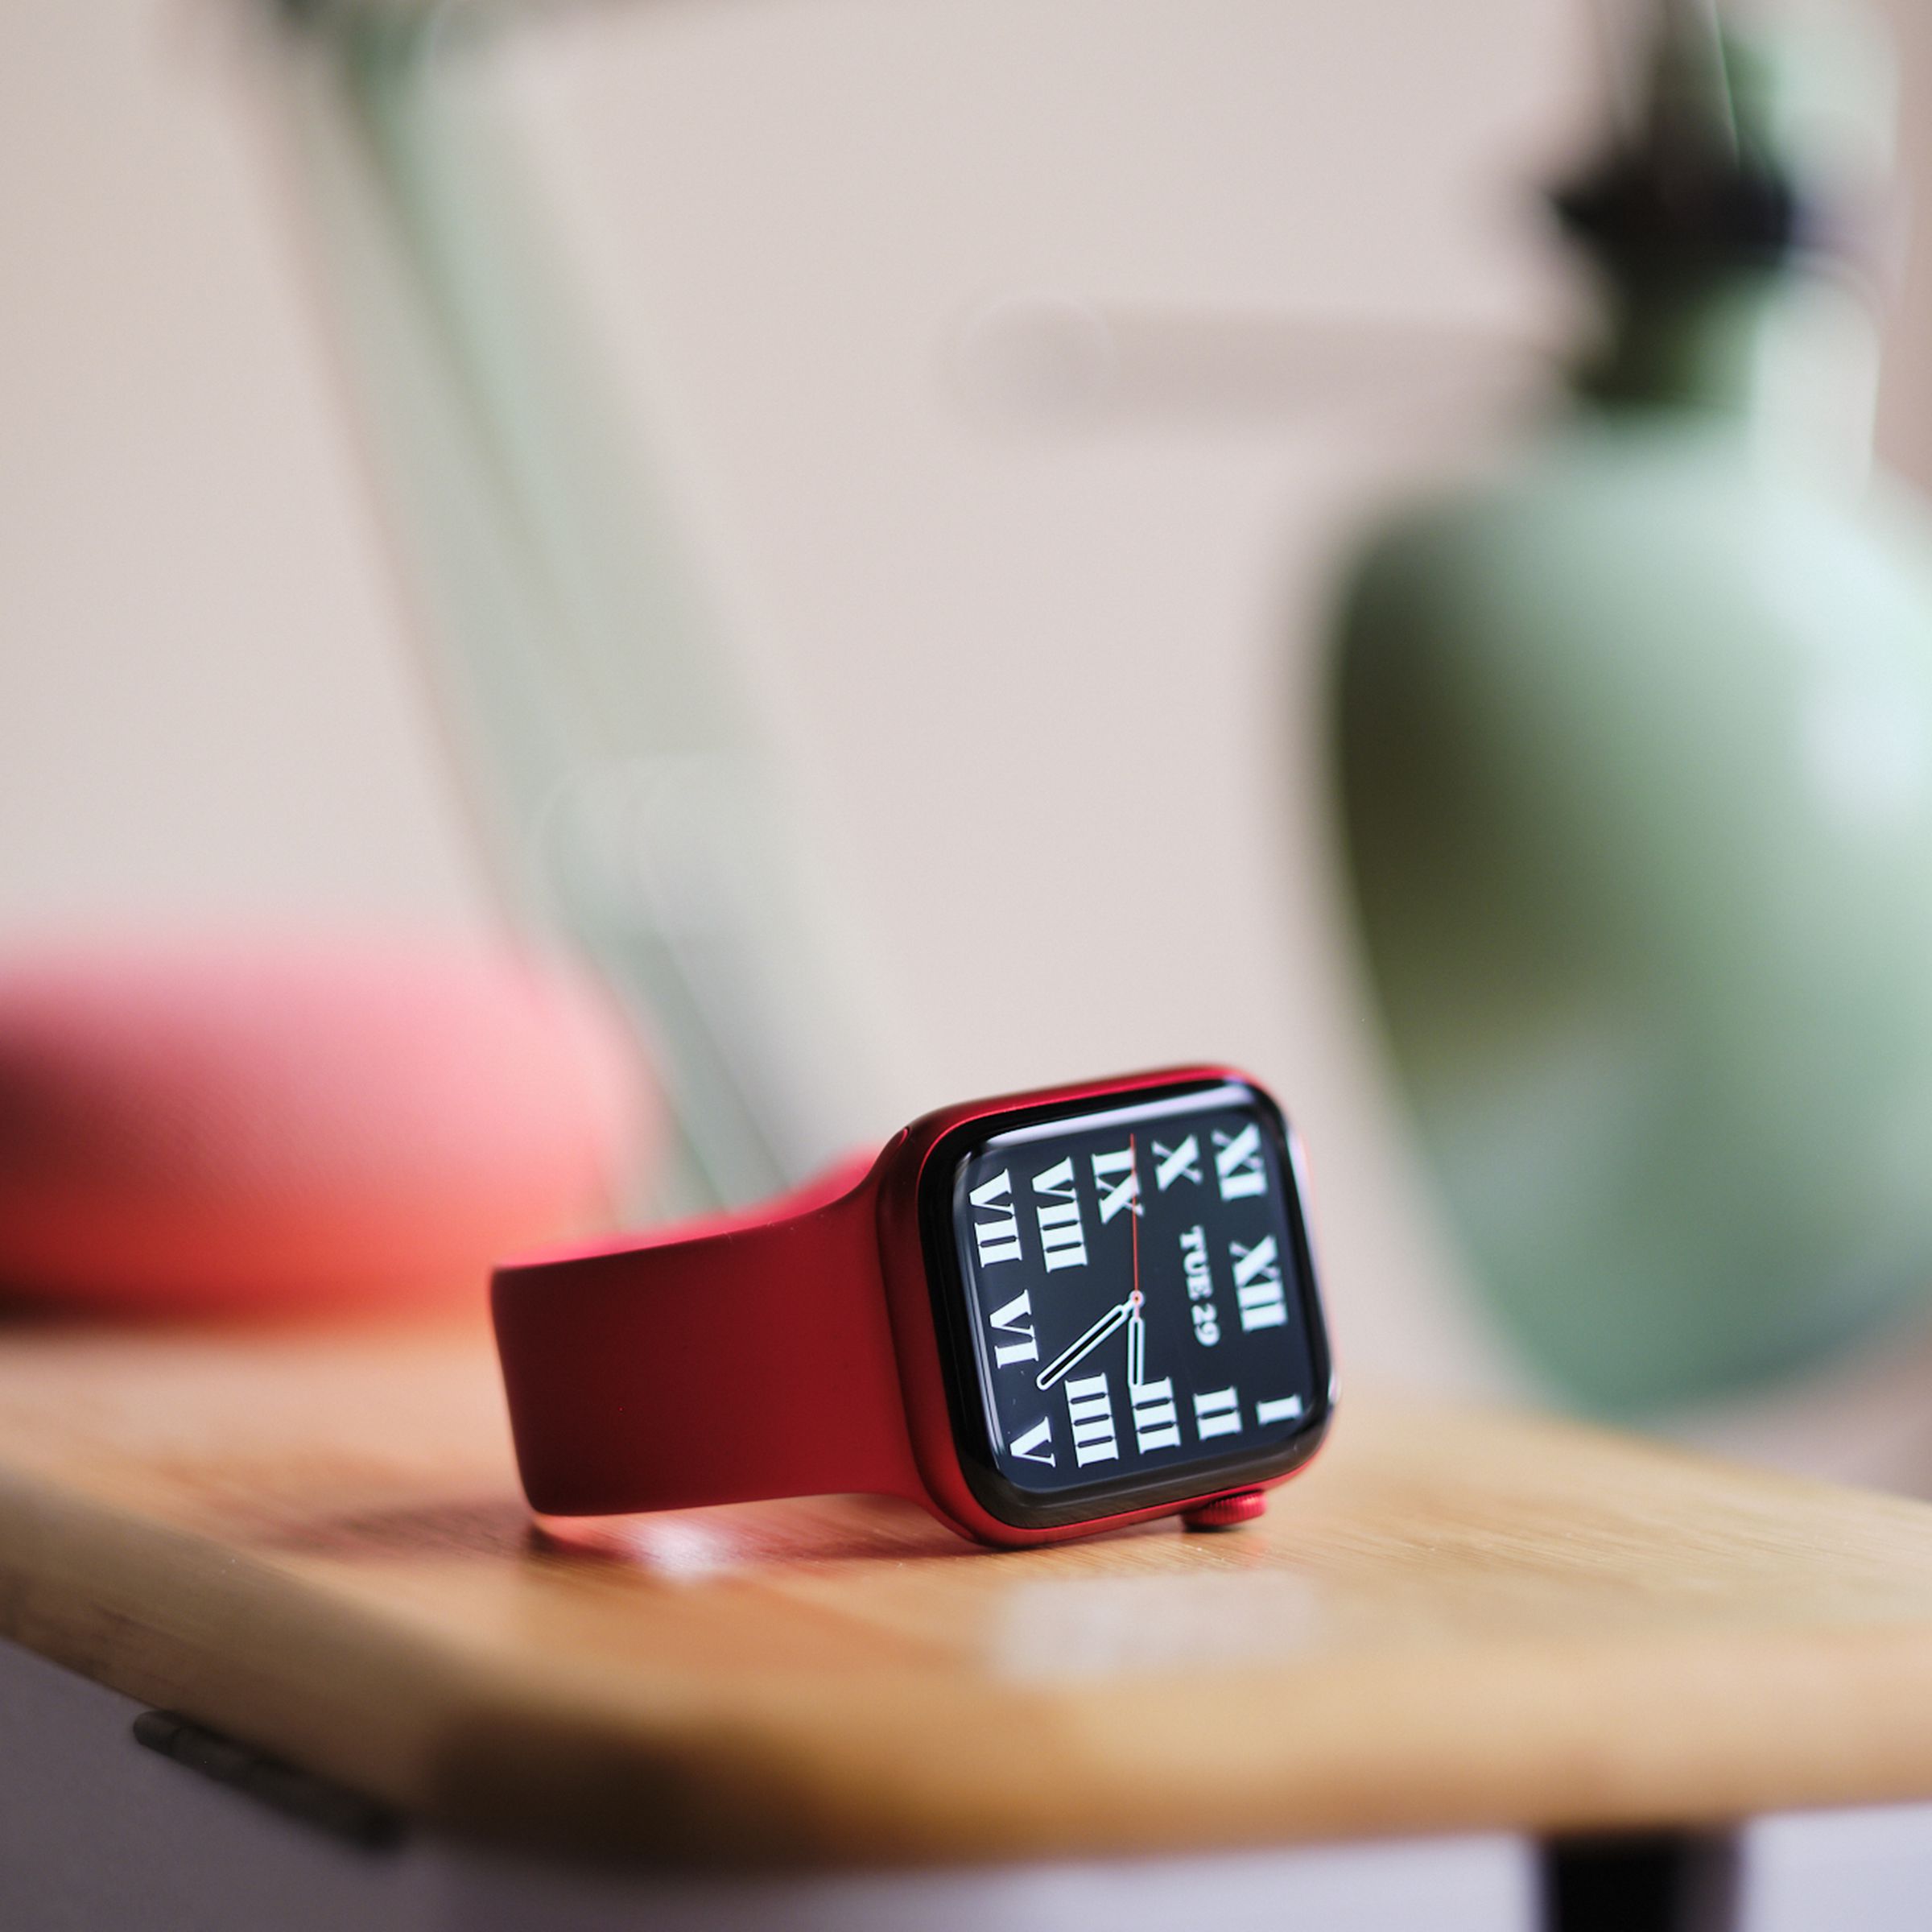 The Apple Watch Series 6, in Product Red